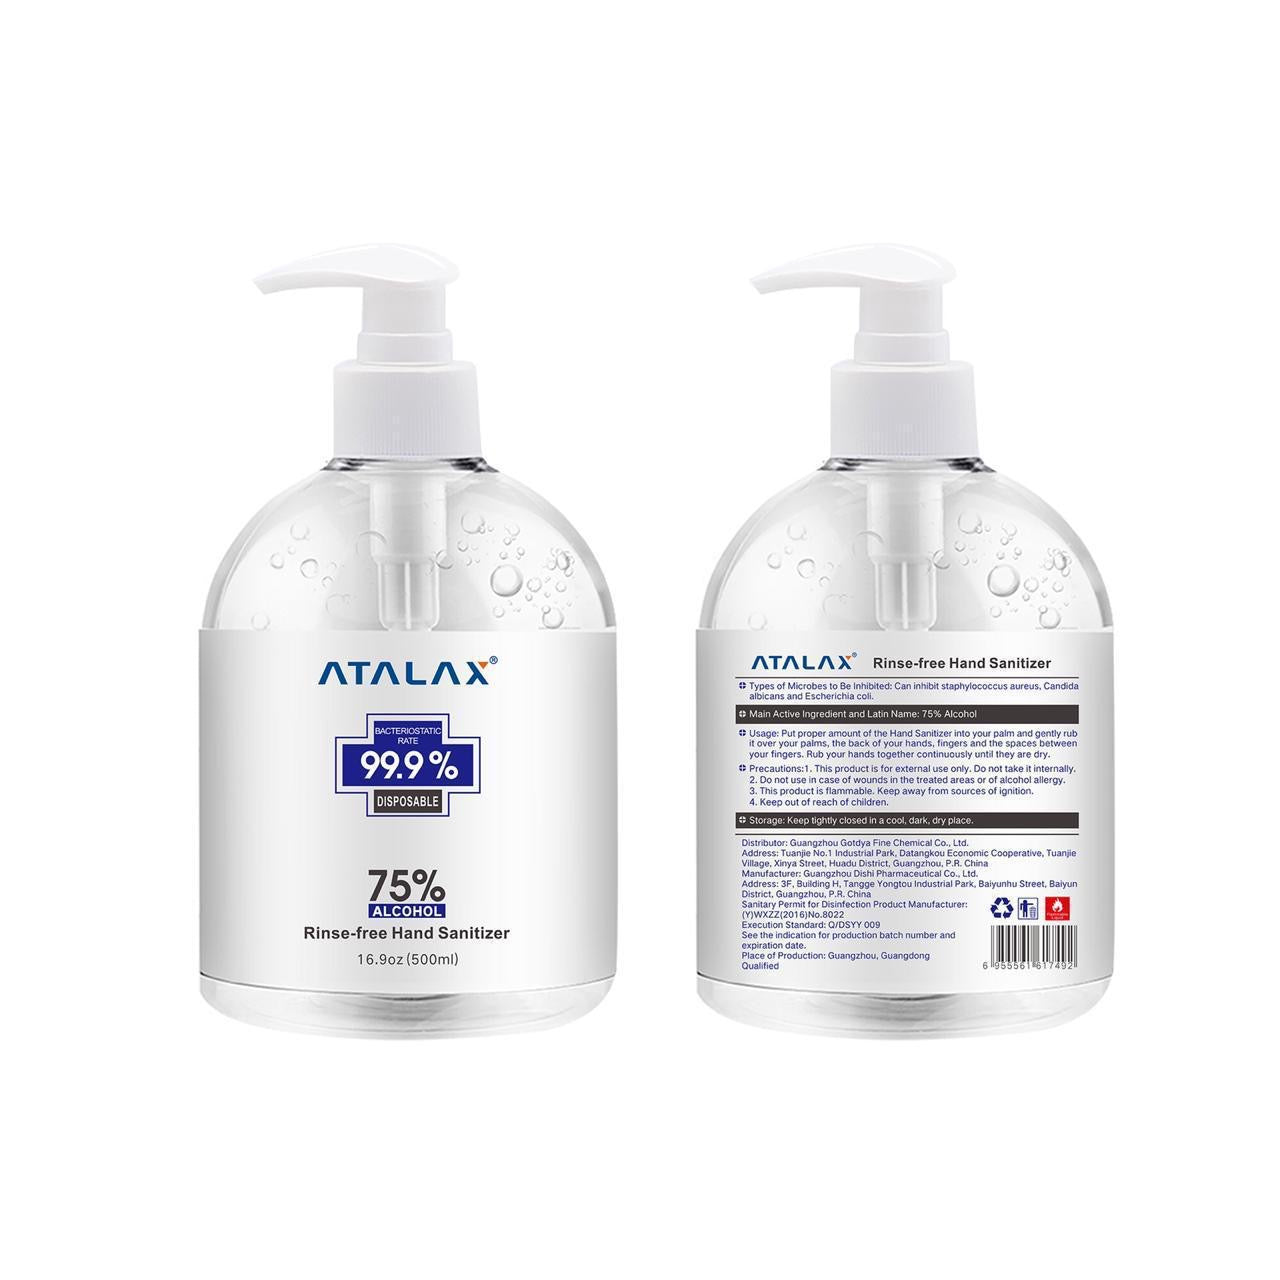 Hand Sanitizer 75% Alcohol 16.9 oz by Atalax "2-PACK"